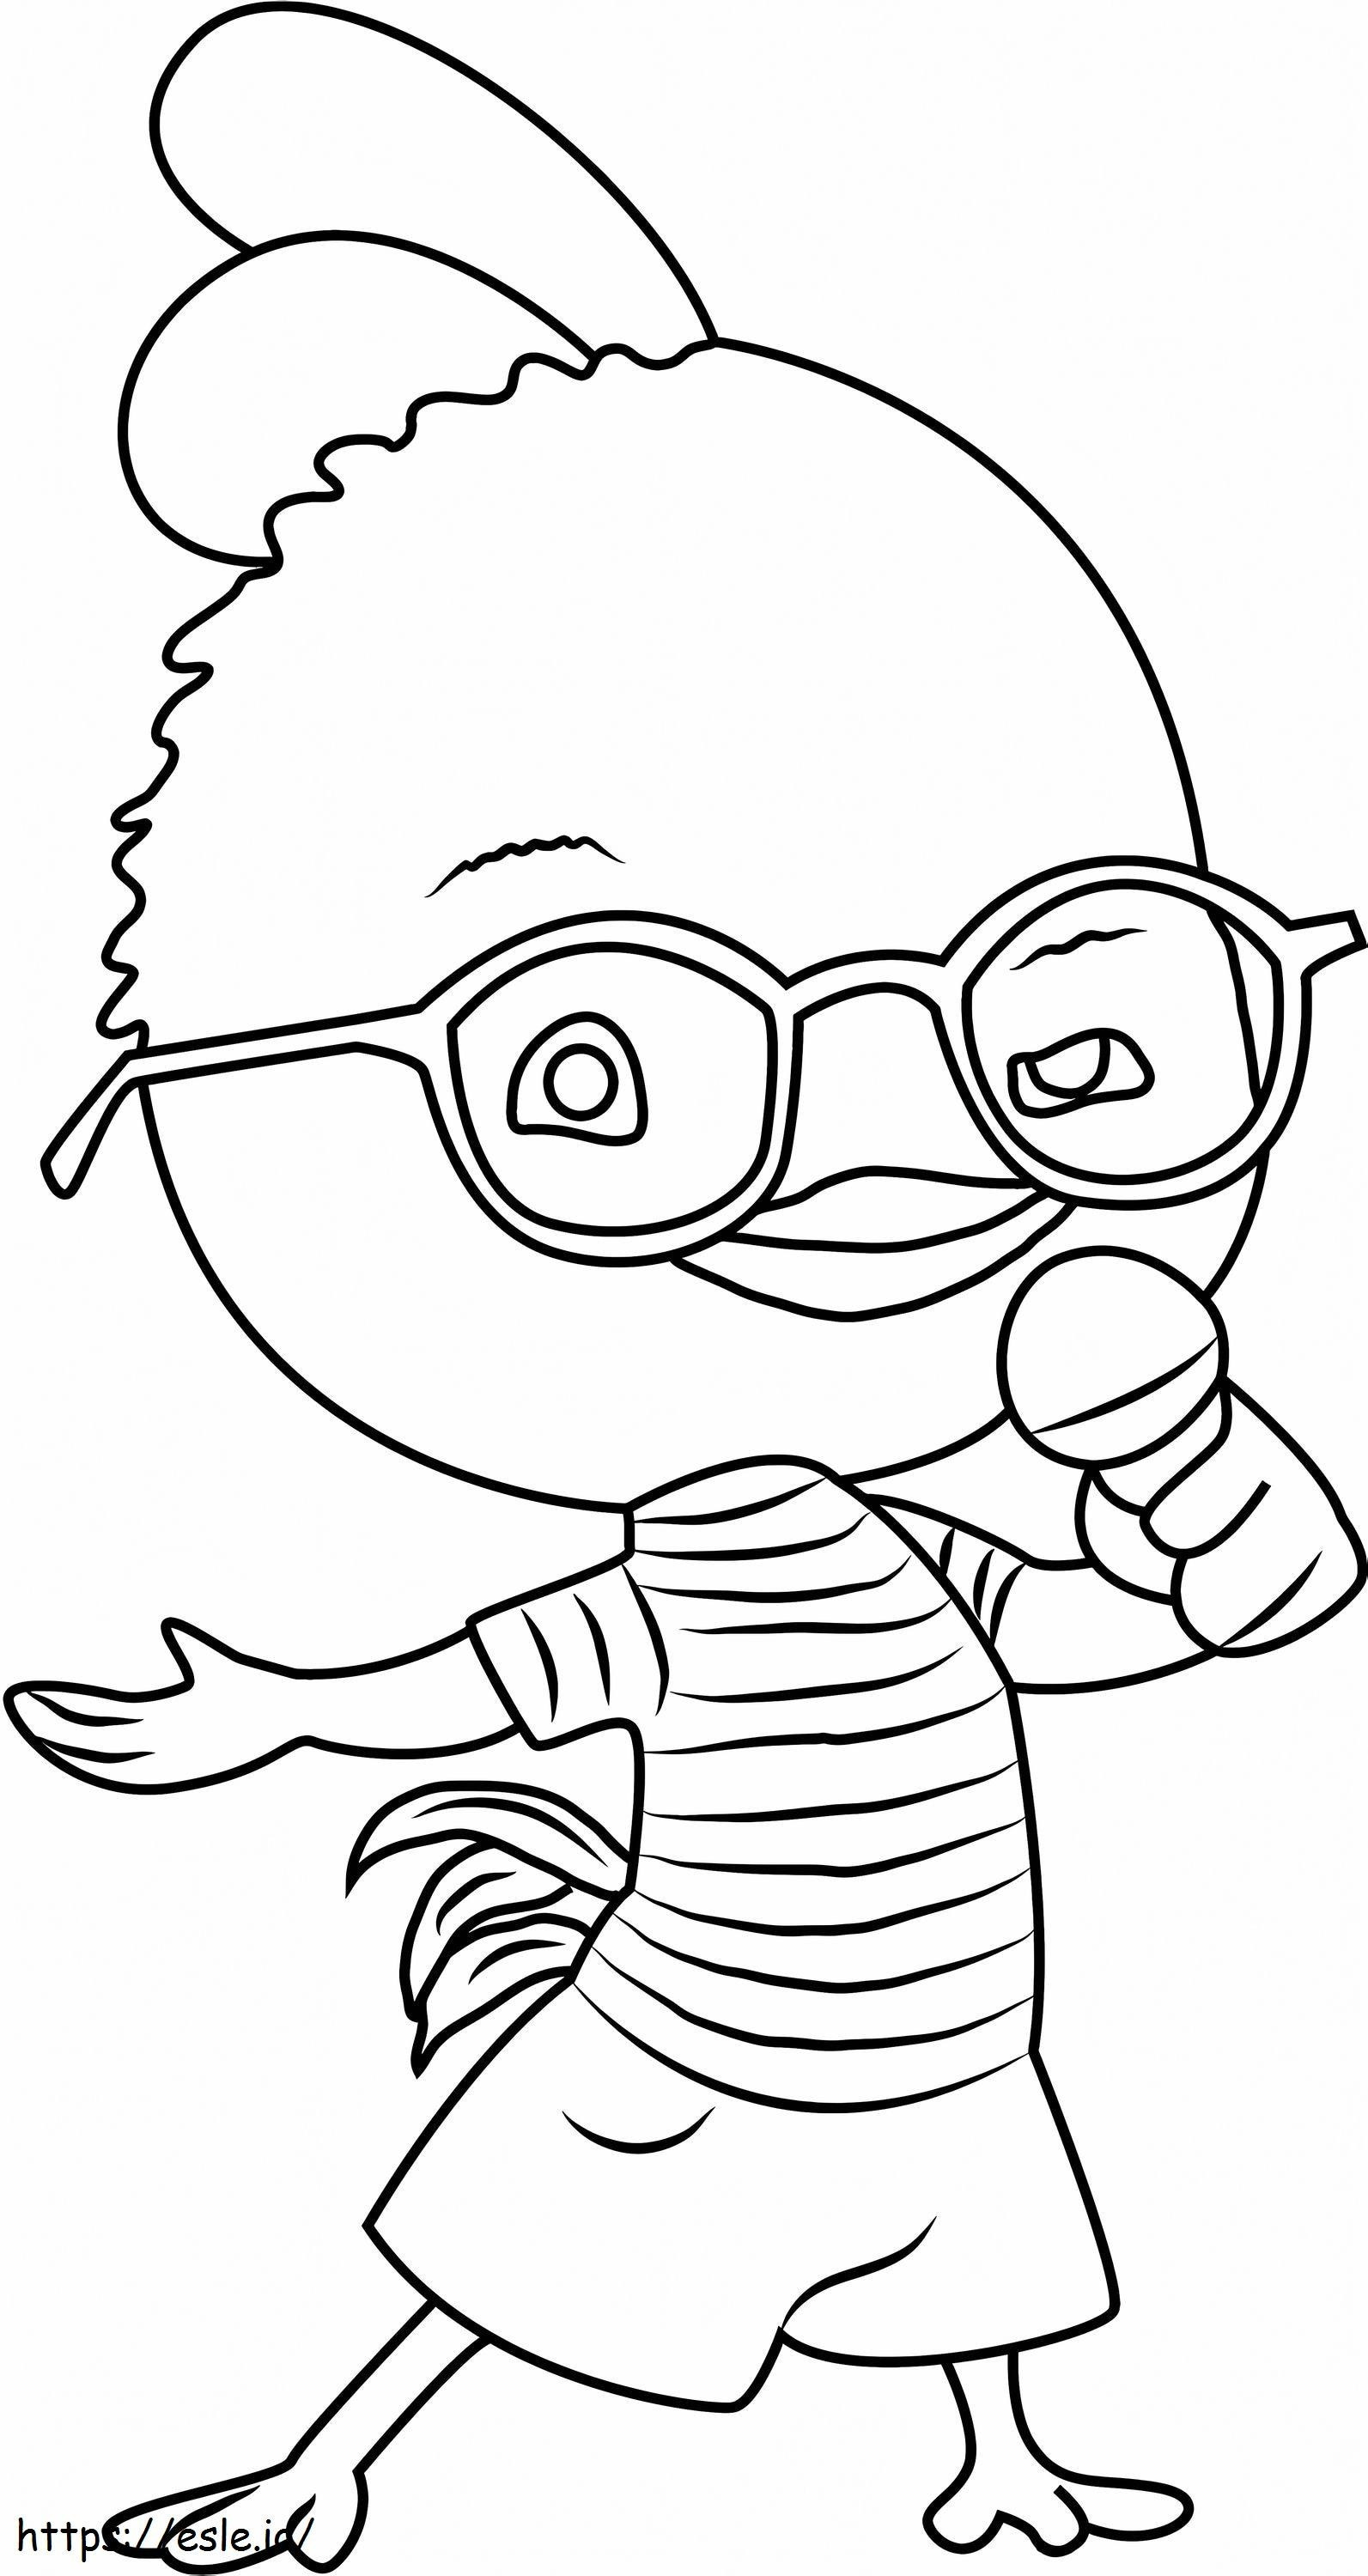 Chicken Little Singing Song A4 coloring page